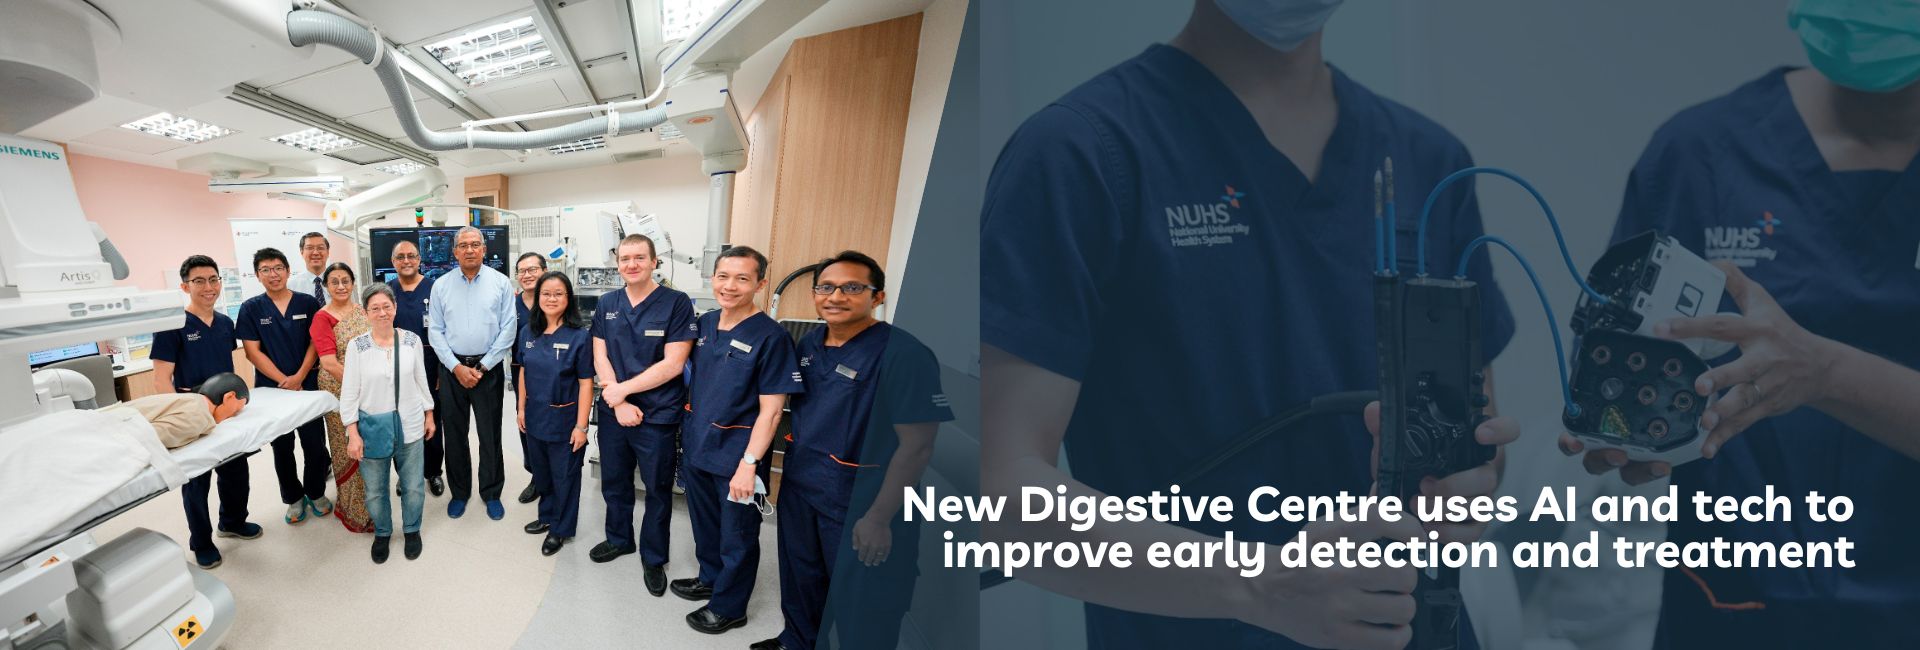 Launch of National University Centre for Digestive Health